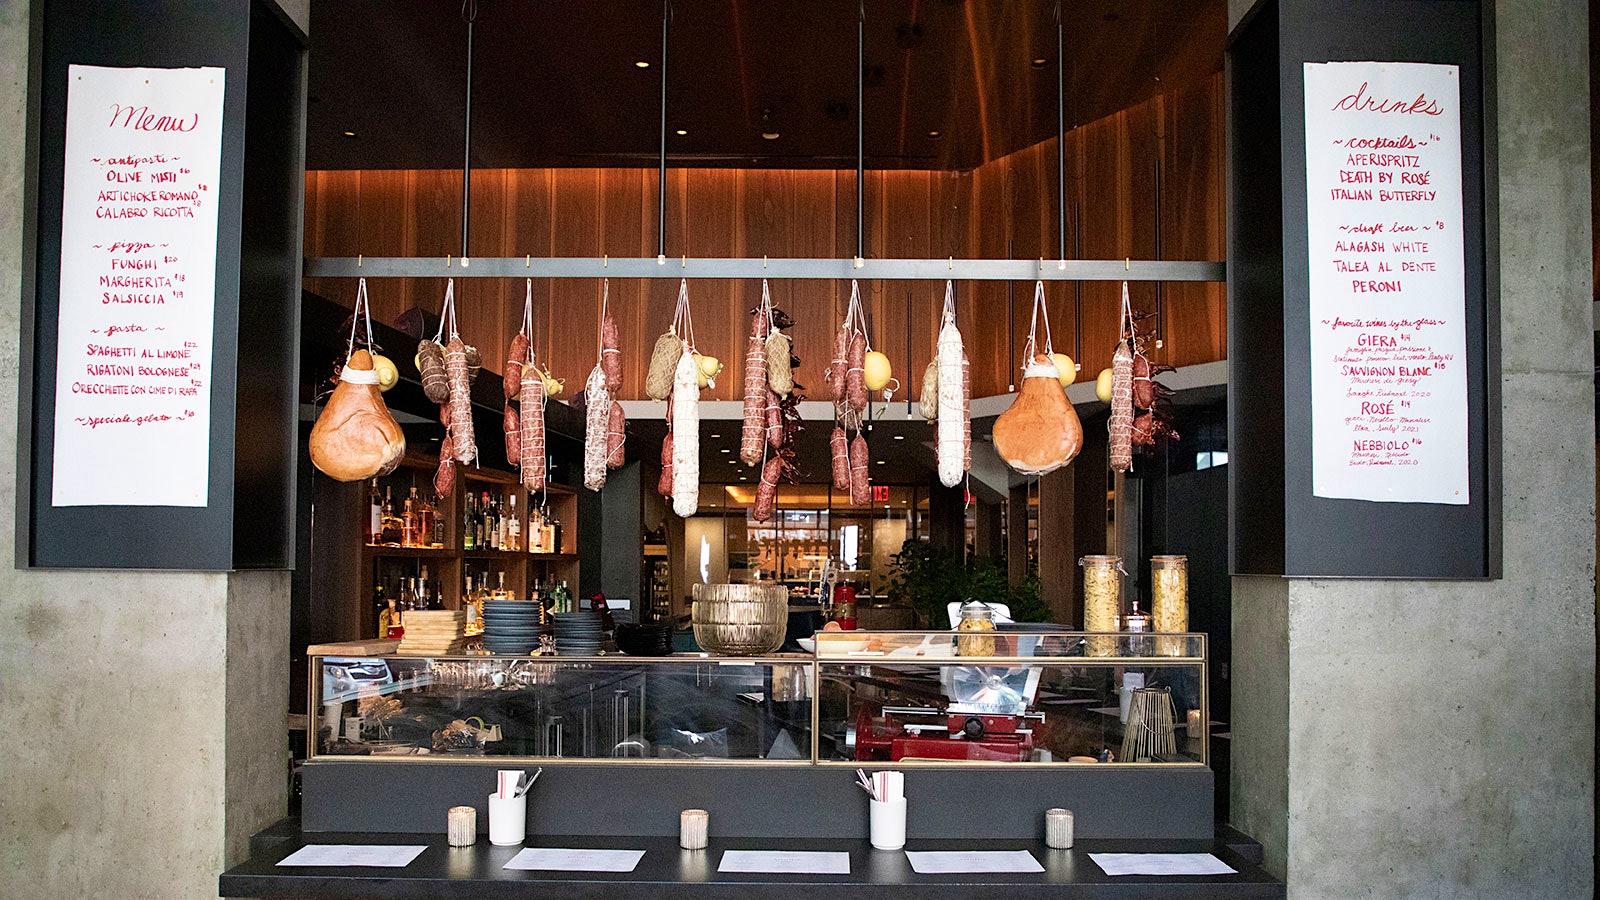  A selection of sausages, hams and other cured meats hang over a bar area with 5 white bar stools between slate-gray walls